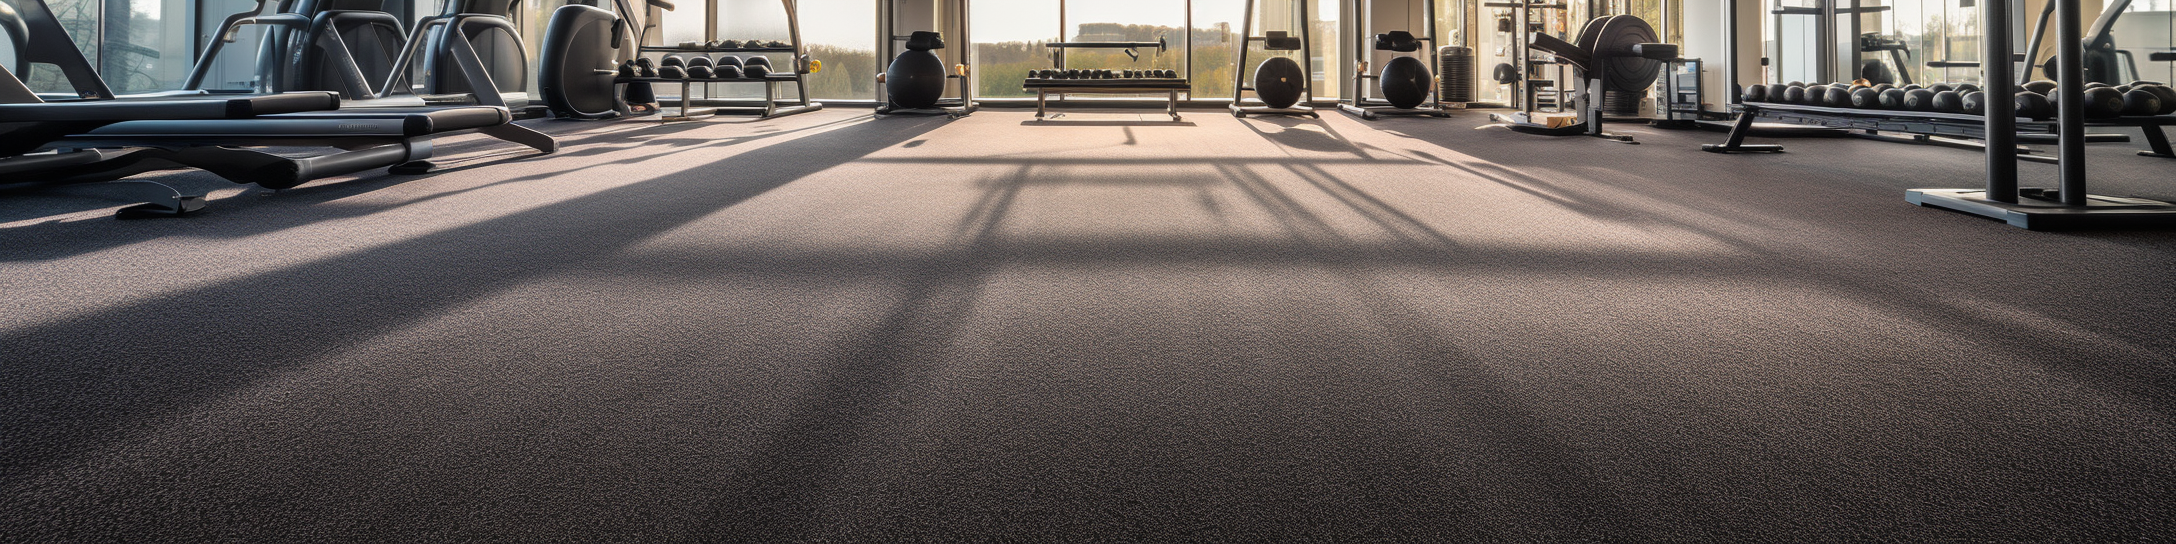 Carpet Cleaning for Gyms and Fitness Centers